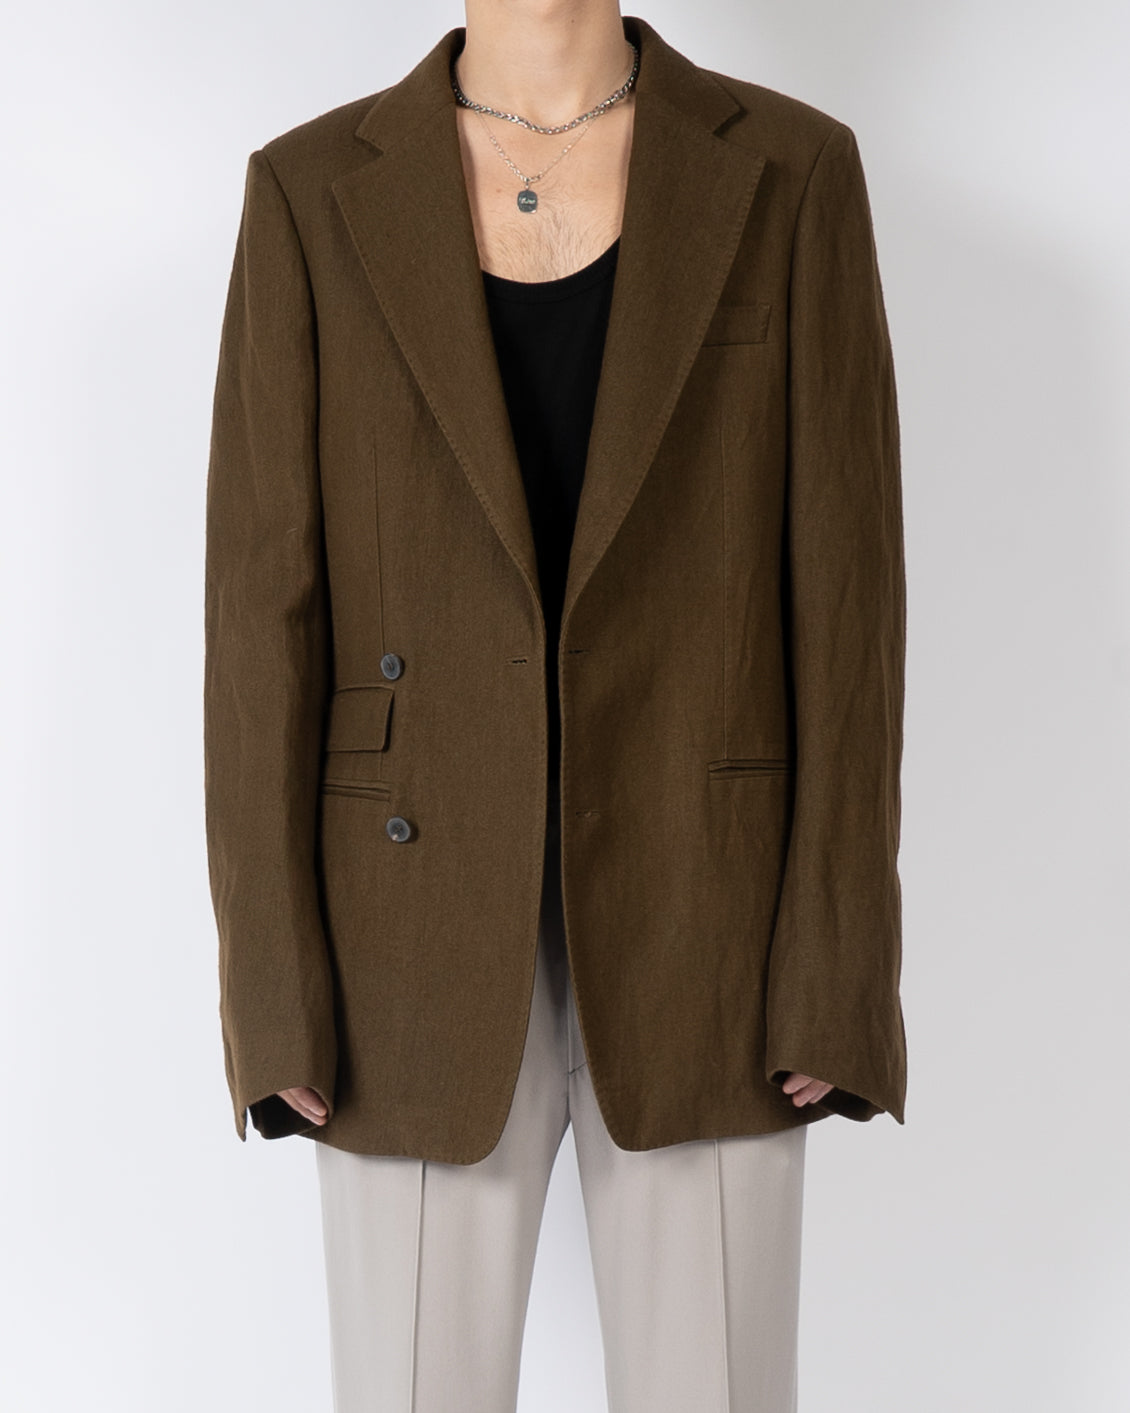 FW15 Brown Double Breasted Oversized Blazer 1 of 1 Sample